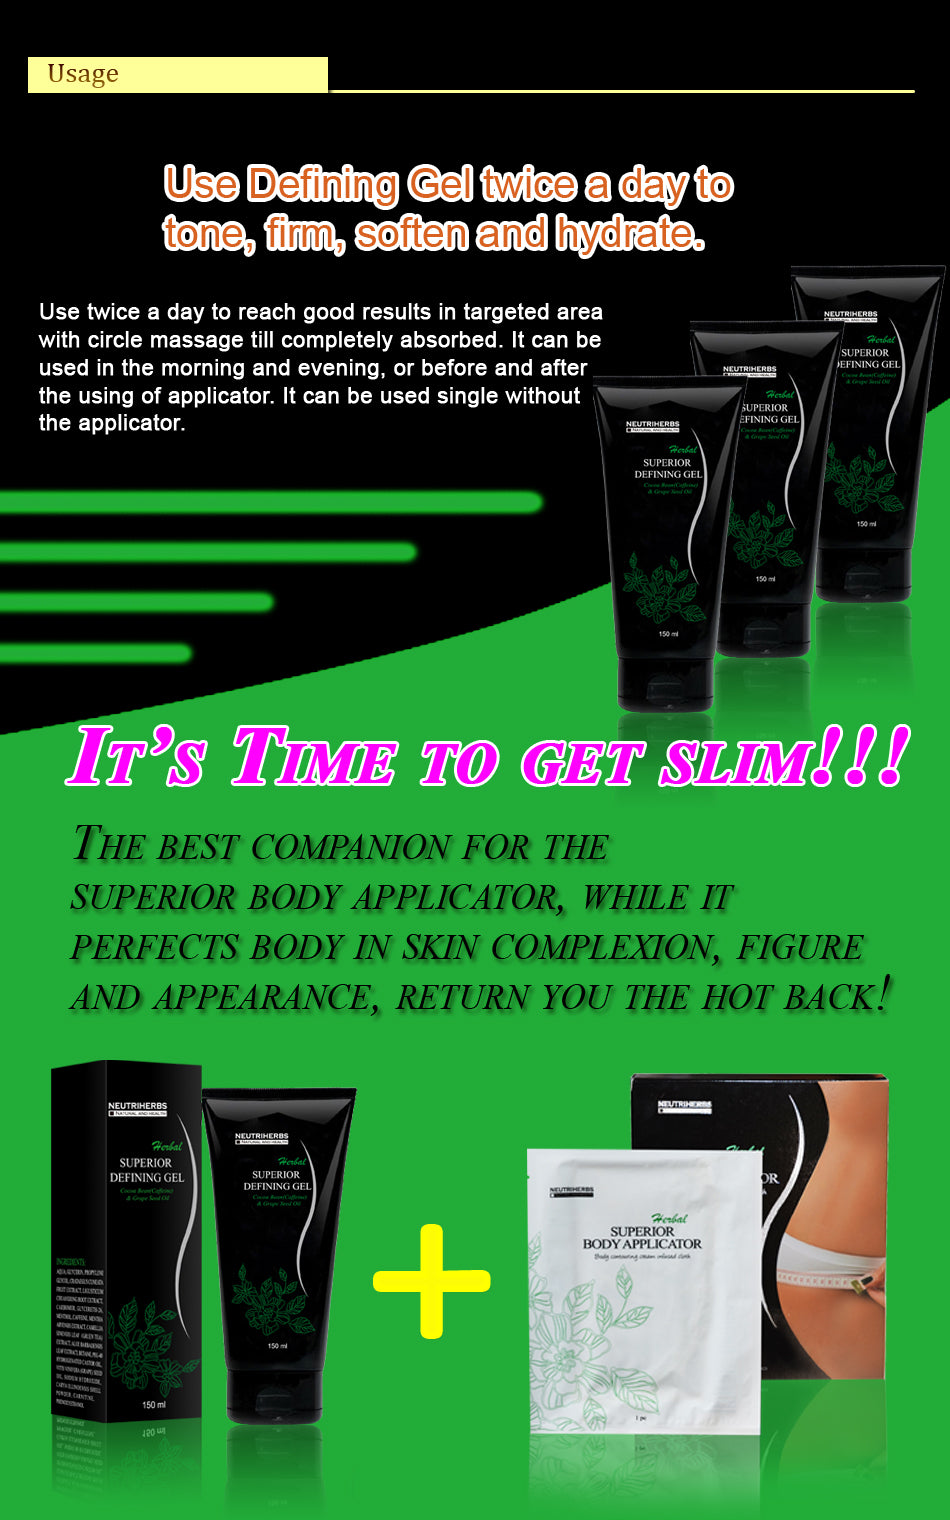 Slimming Defining Gel for Cellulite - amarrie cosmetics